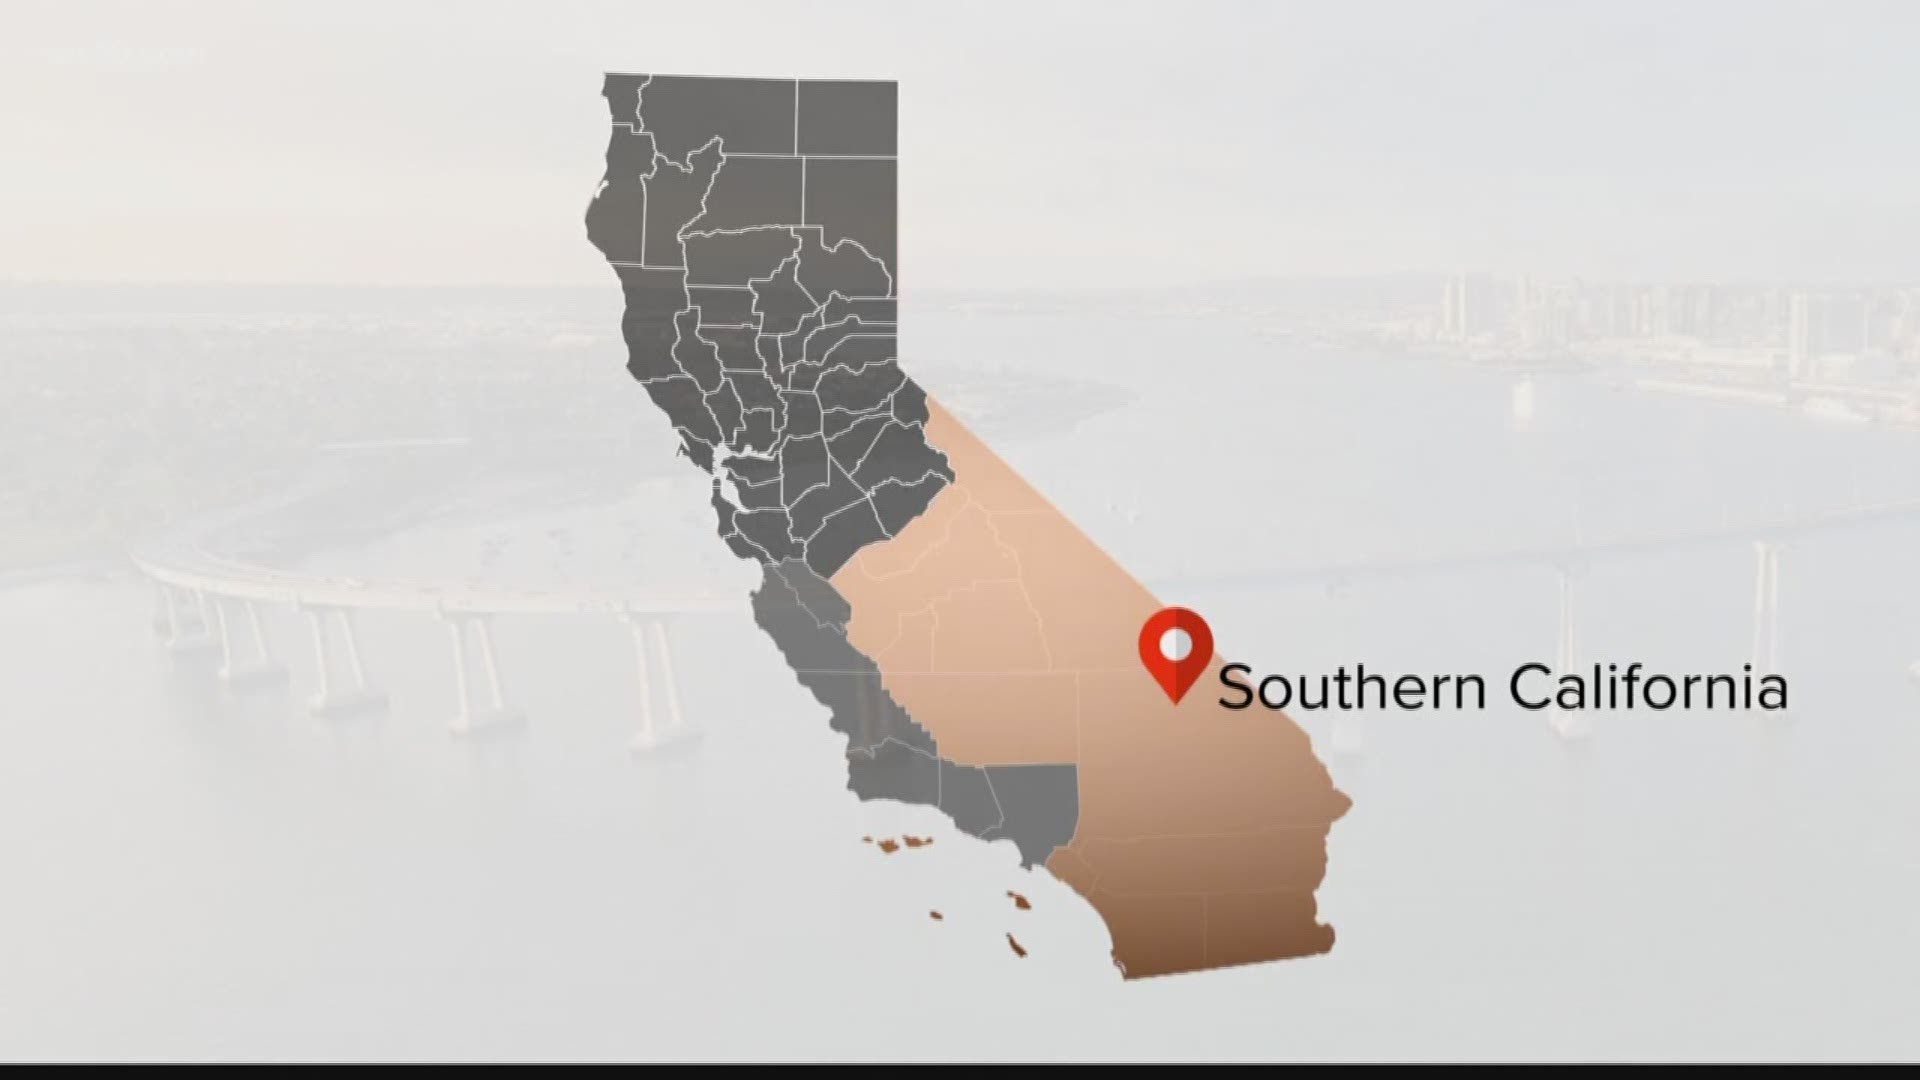 By now you have probably heard the news that billionaire investor Tim Draper wants to split up California into three different states. Do you agree? 